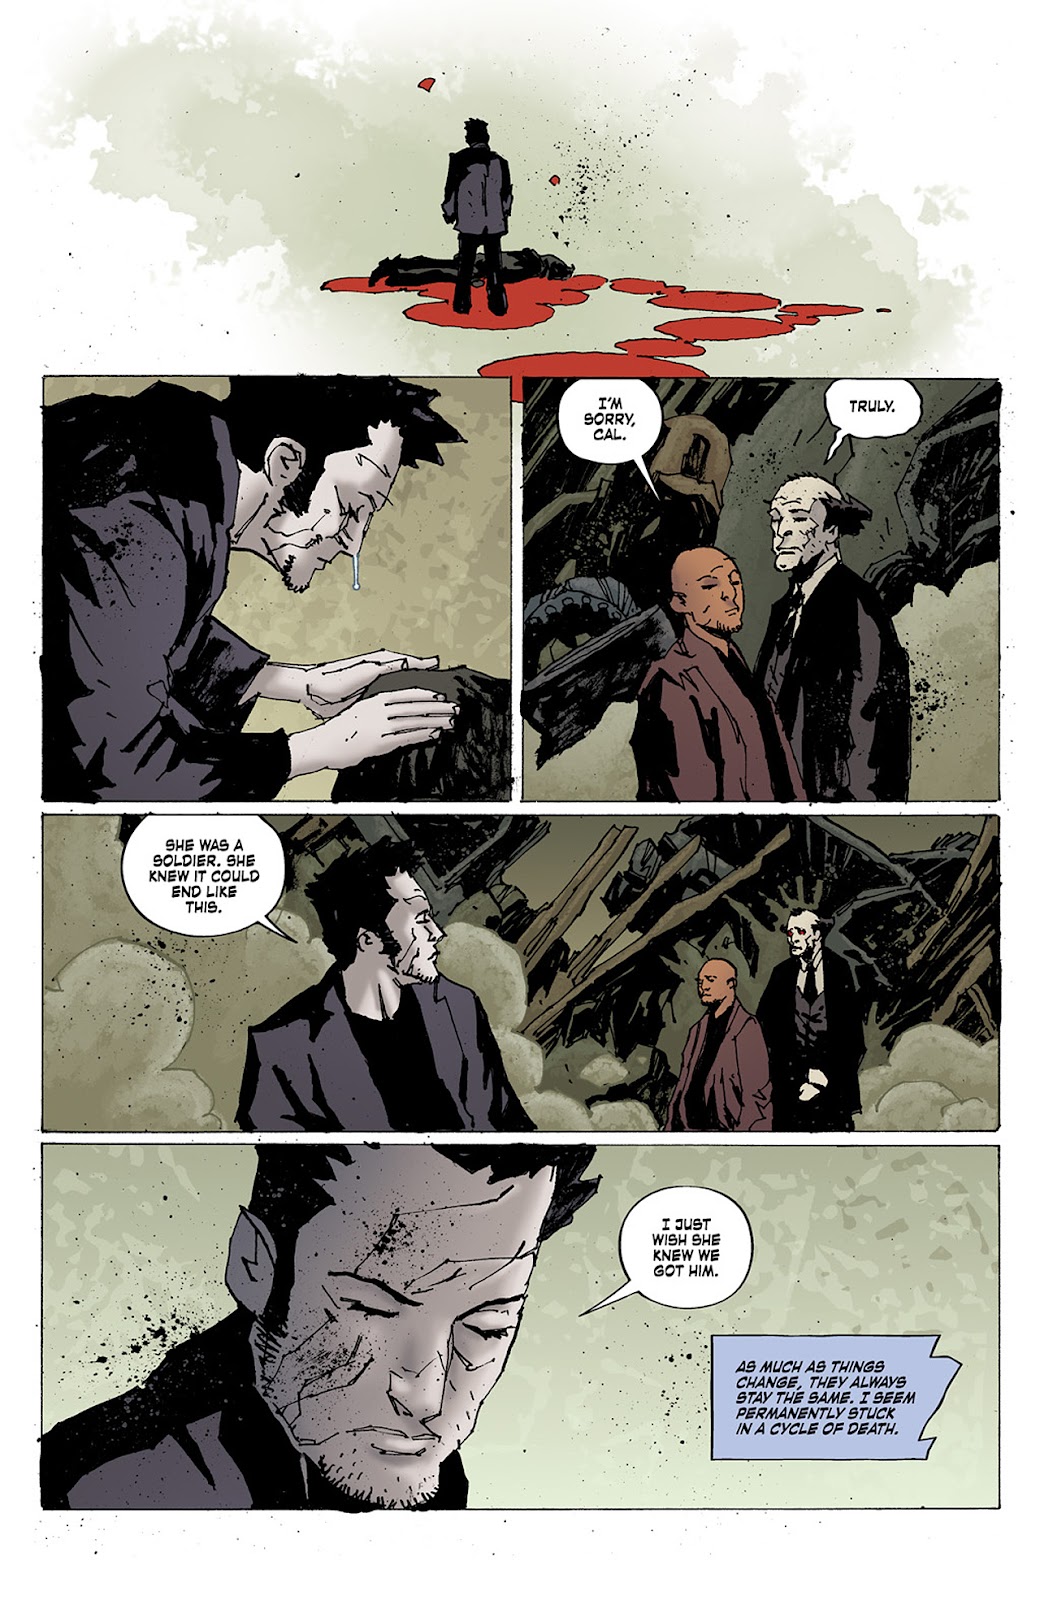 Criminal Macabre: Final Night - The 30 Days of Night Crossover issue 4 - Page 25